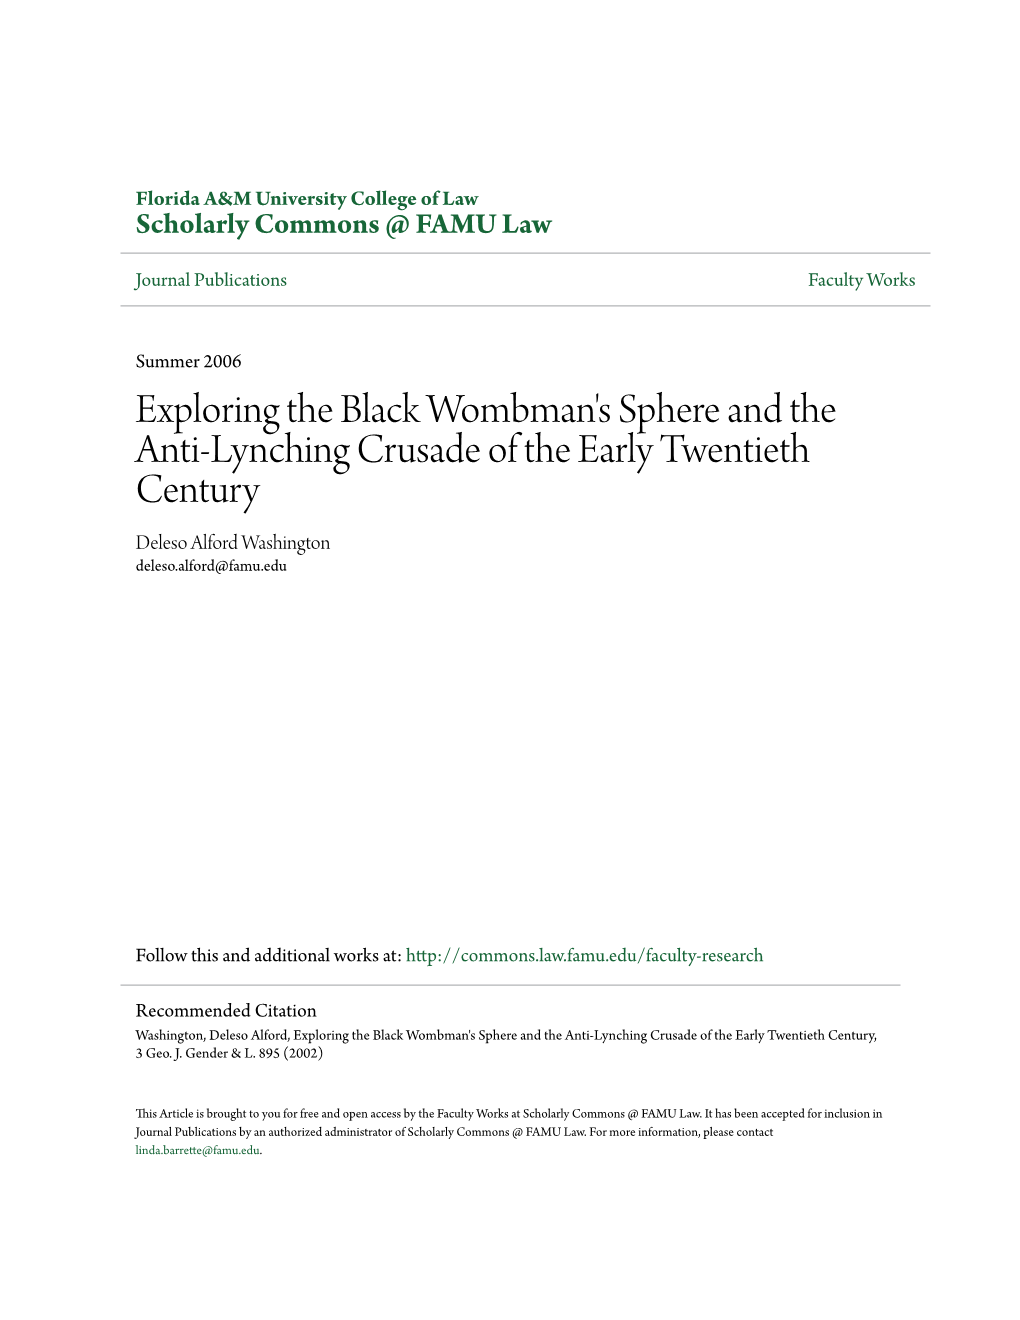 Exploring the Black Wombman's Sphere and the Anti-Lynching Crusade of the Early Twentieth Century Deleso Alford Washington Deleso.Alford@Famu.Edu